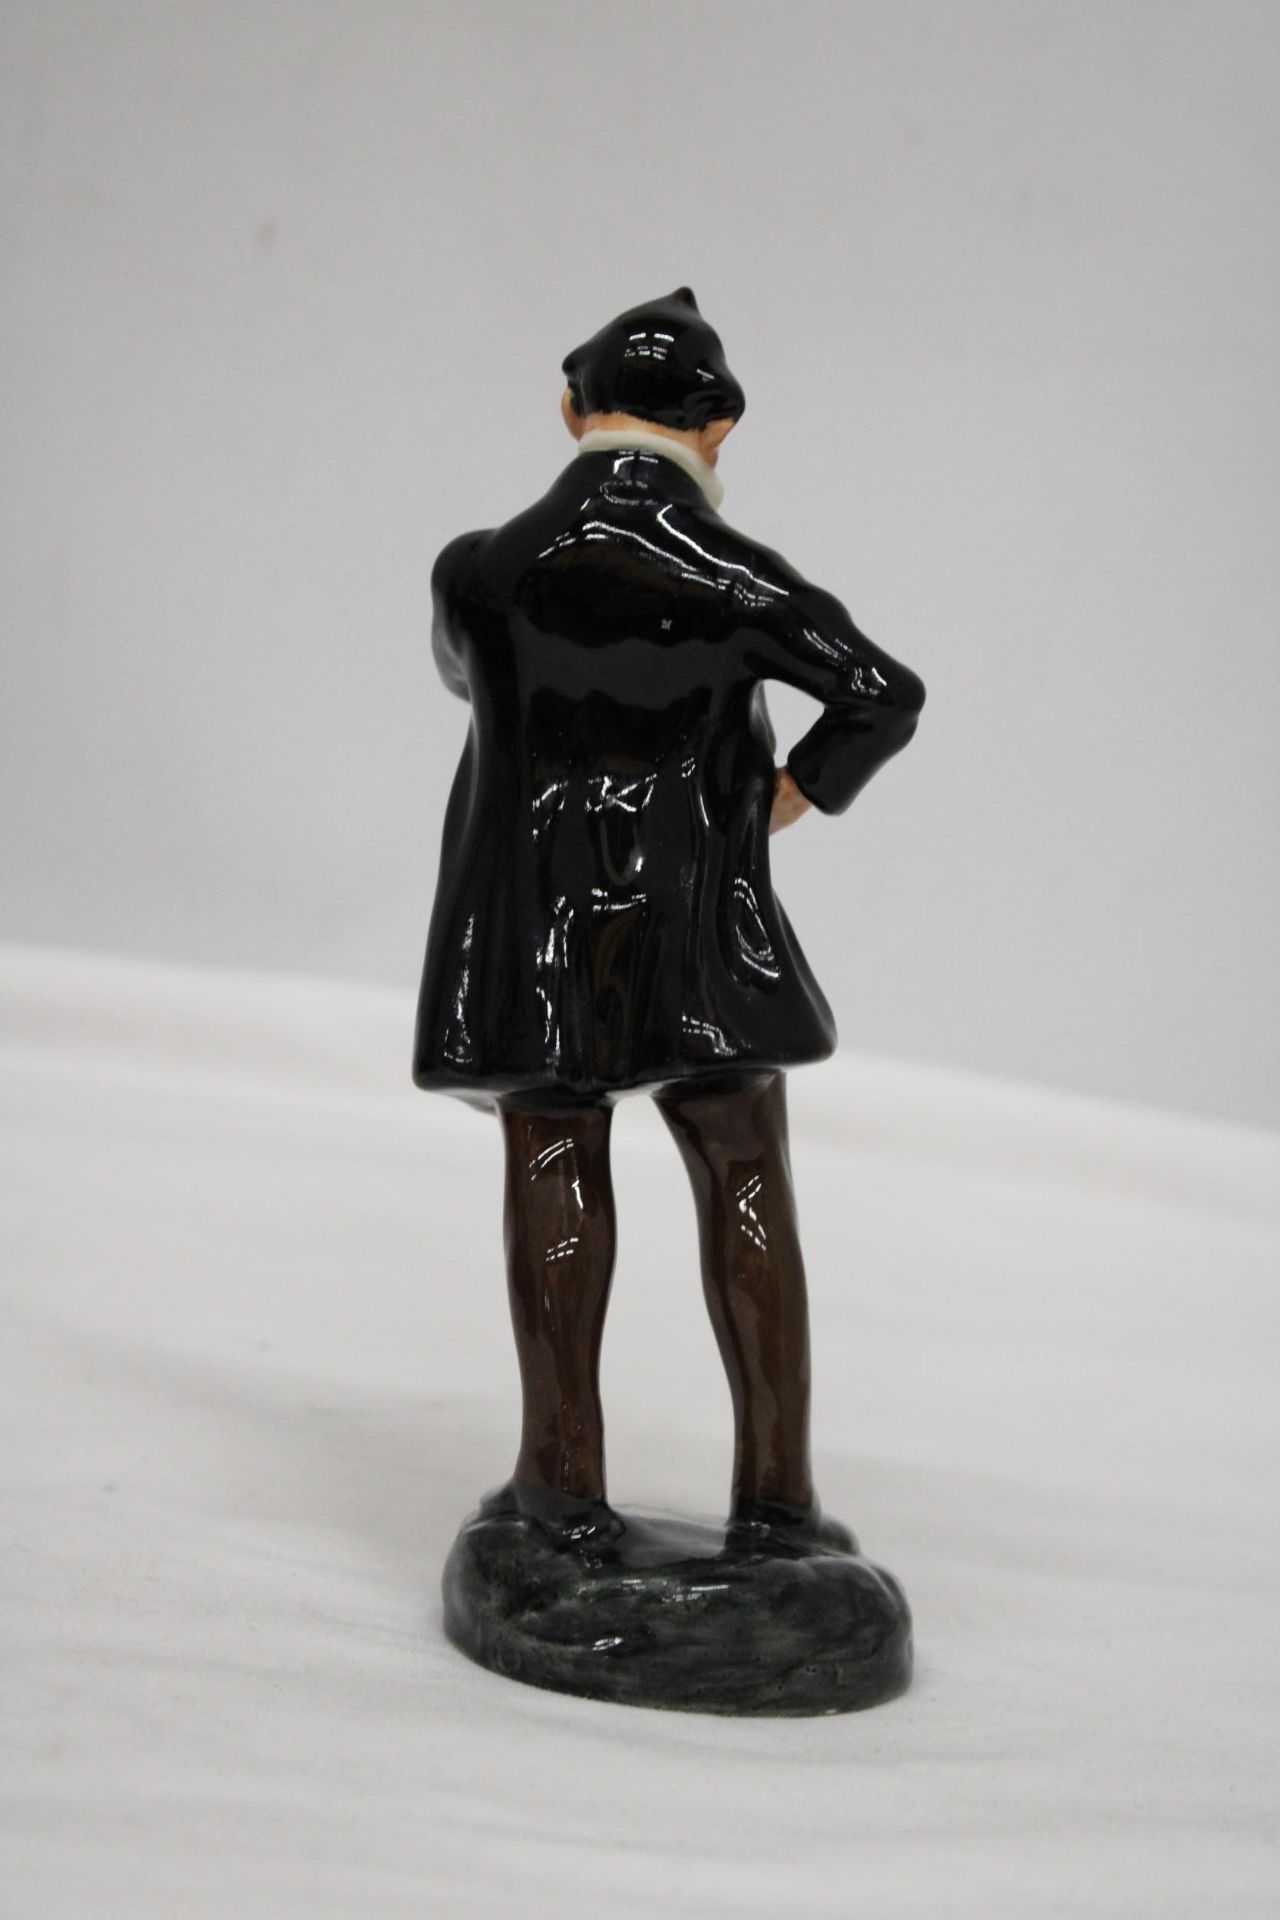 A ROYAL DOULTON 'PECKSNIFF' FIGURINE (HN 2098) - Image 4 of 6